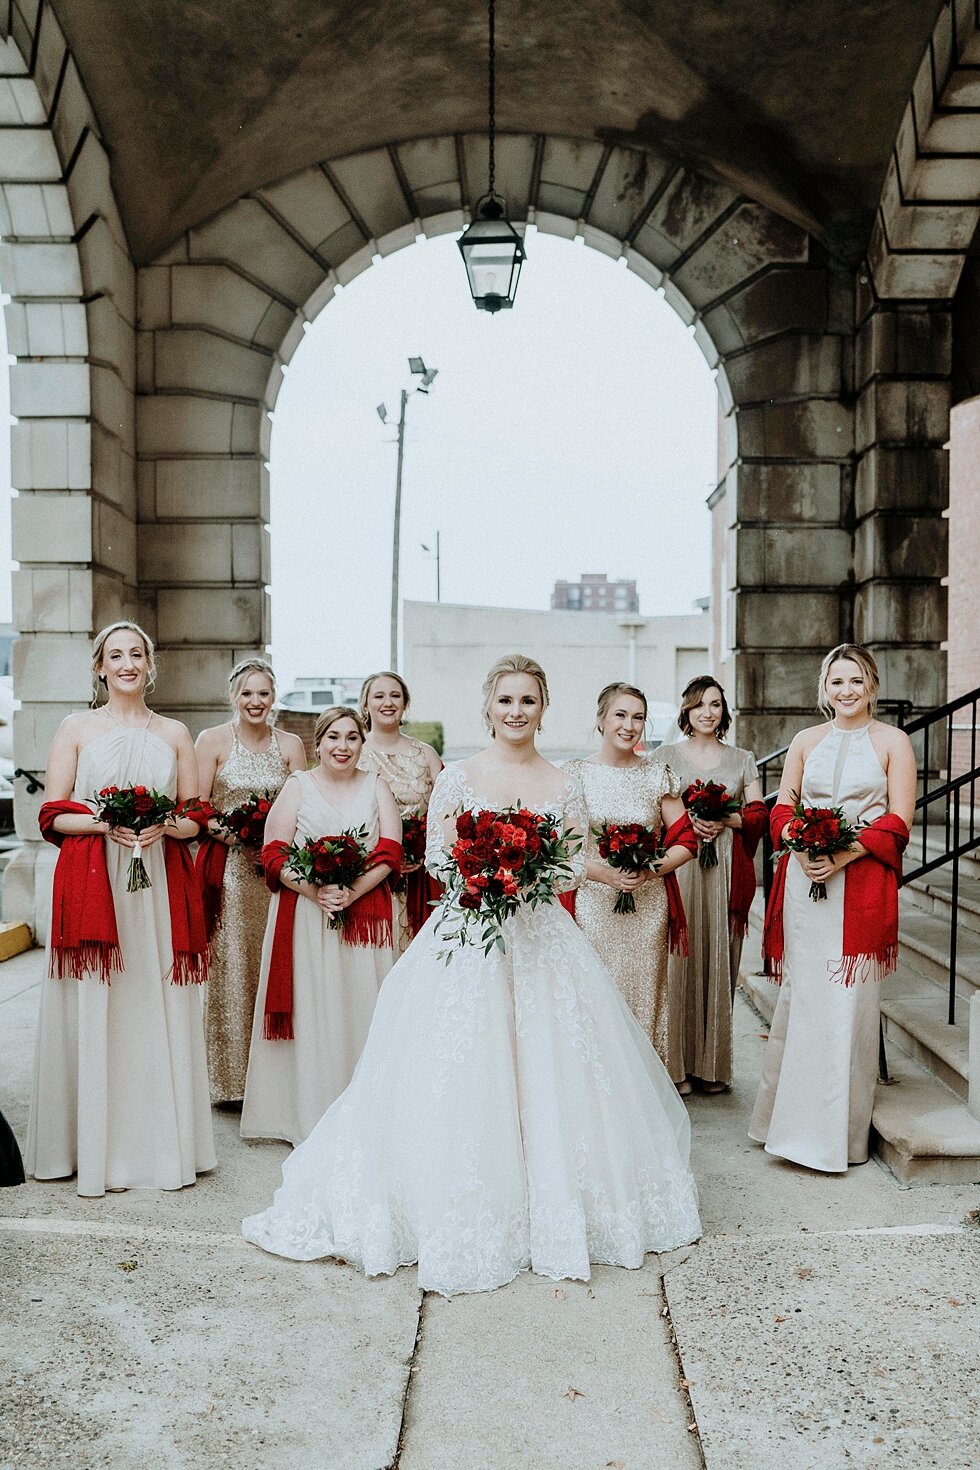  Pendennis Club winter wedding in Lousiville, Kentucky with the stunning bridesmaids and bride in all white with splashes of red with their bridal bouquets and scarves. Brisk February winter wedding Pendennis Club Louisville, Kentucky southern weddin